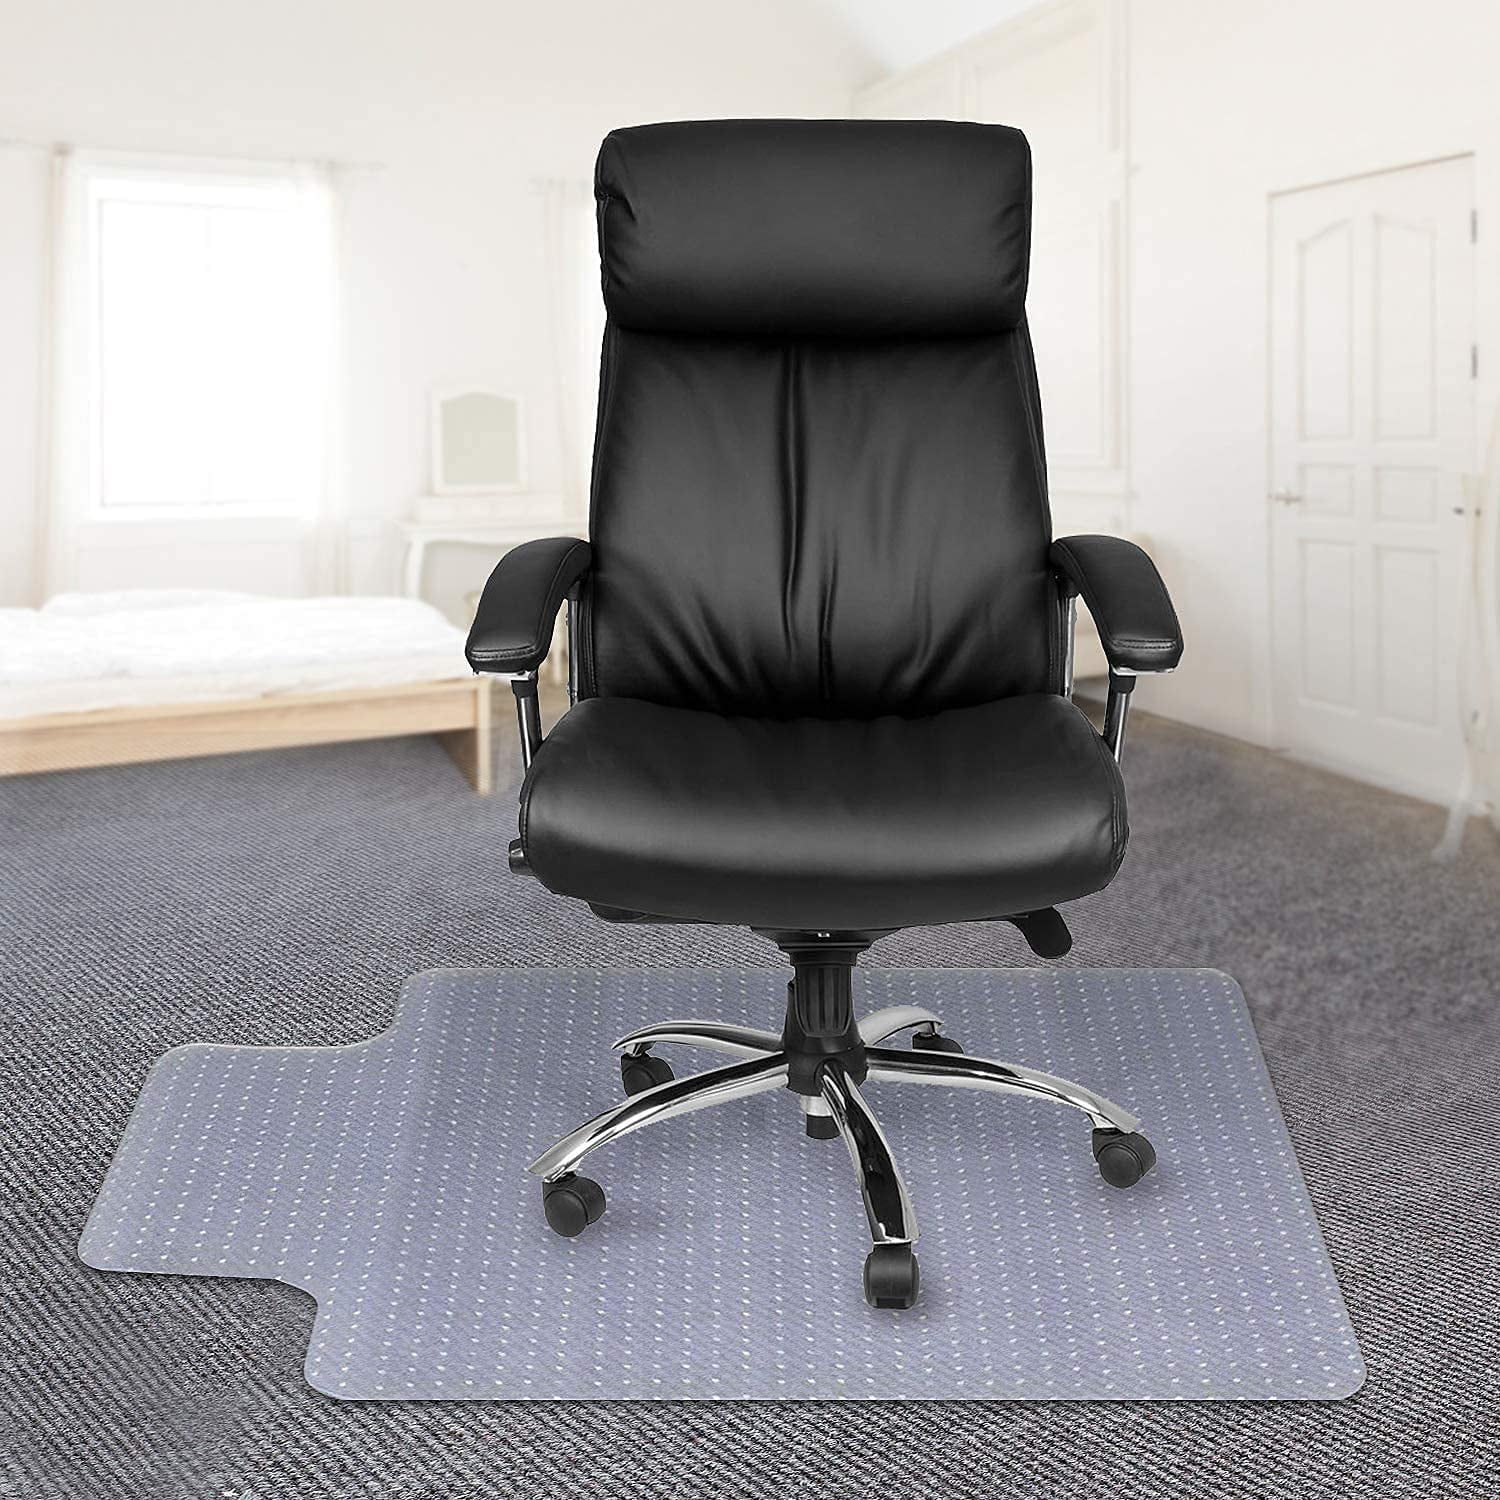 Heavy Duty for Home Office Computer Desk Rolling Chair Office Chair Mat for Carpet Easy Expanded WASJOYE 36x48 Round Transparent PVC Carpet Floor Protector Cover Rug Mat with Non-Slip Studded Lip 